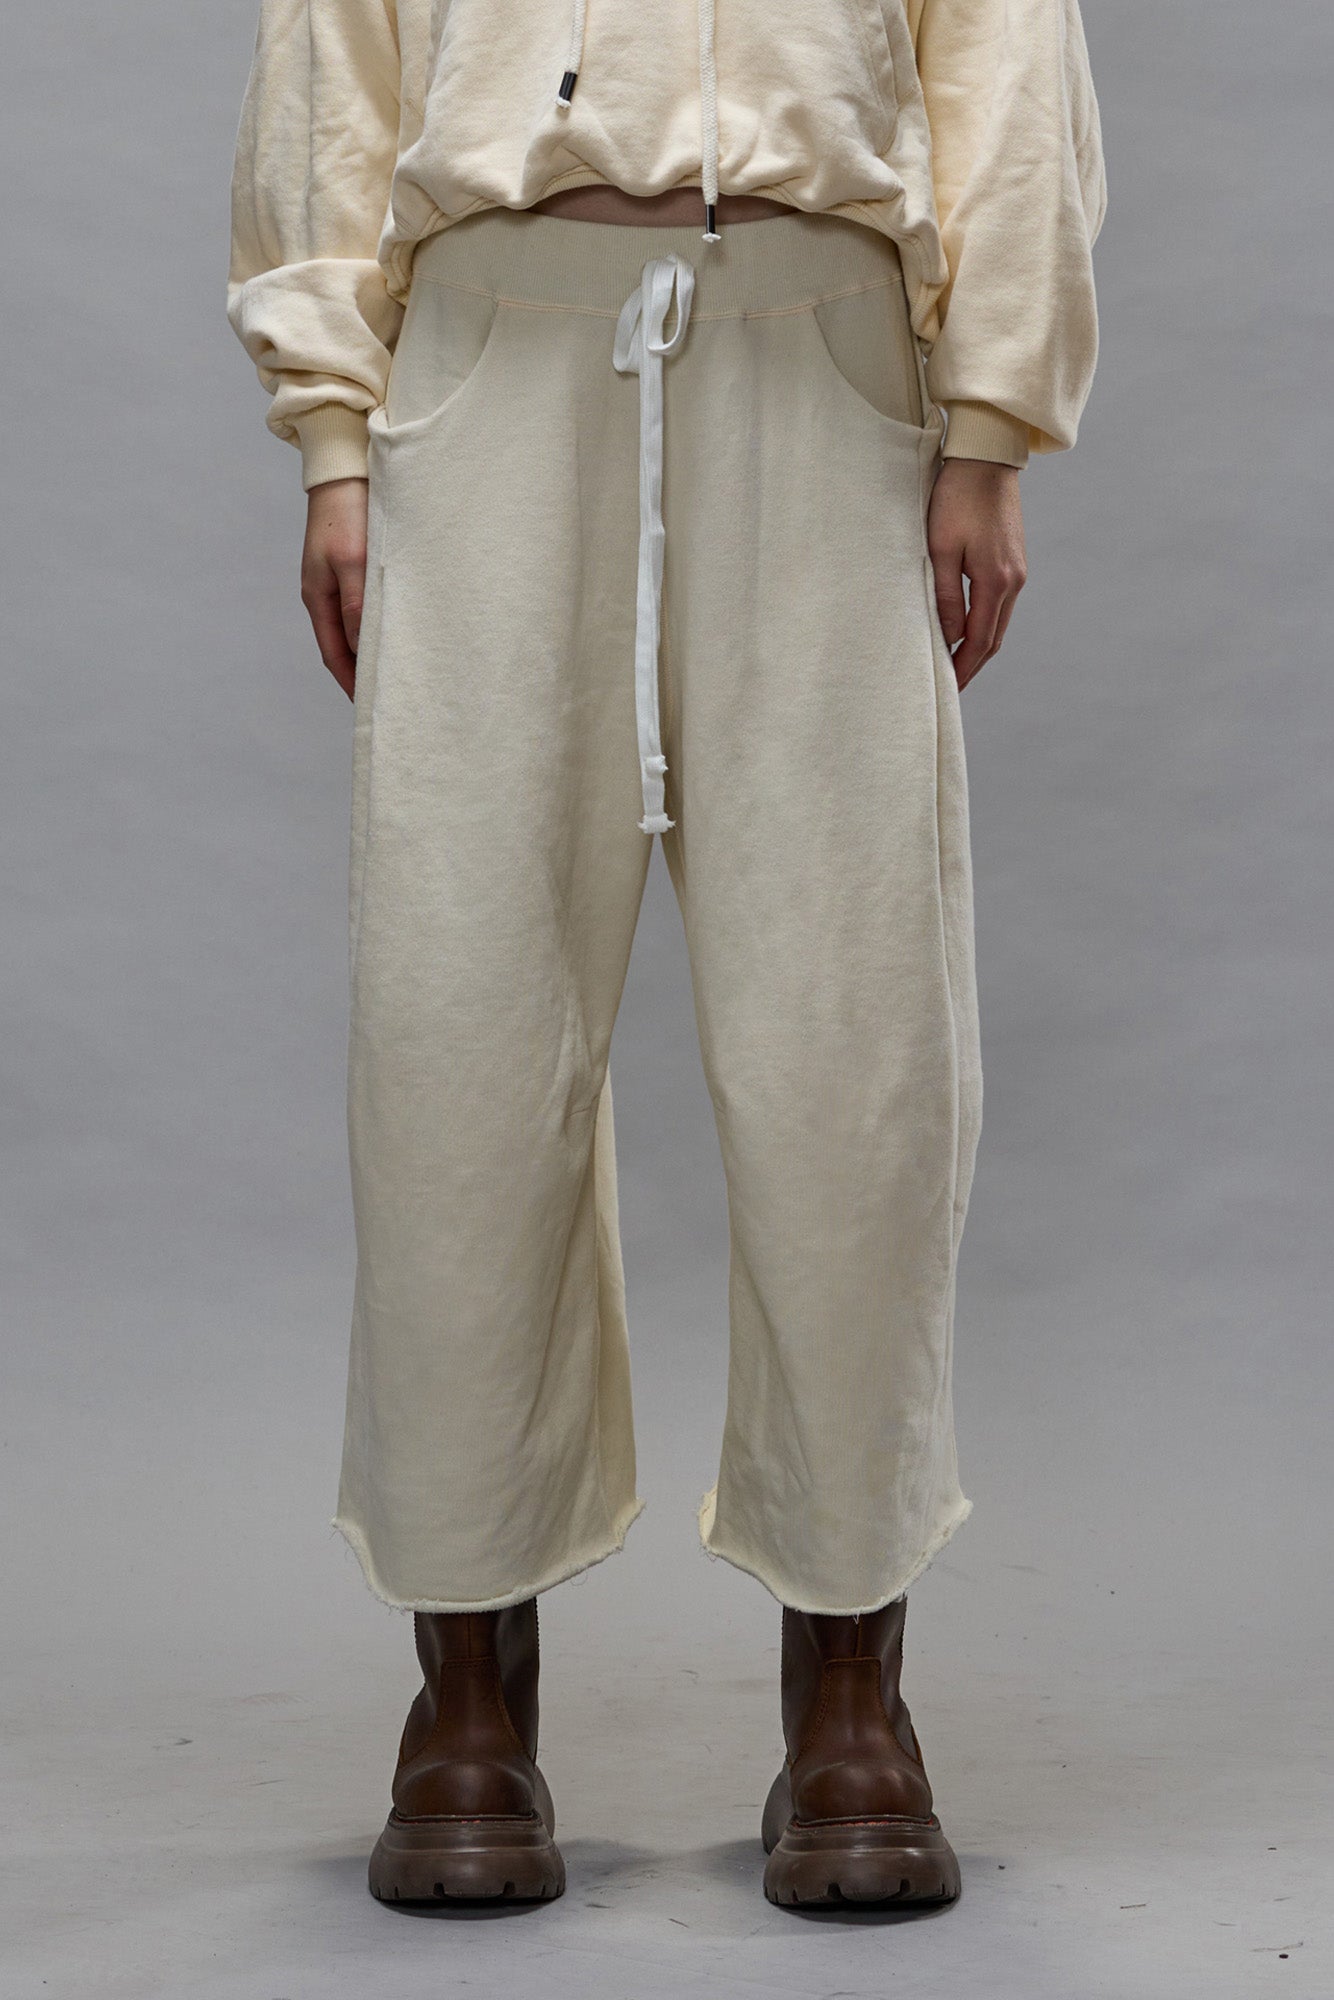 CROPPED PLEATED SWEATPANT - NATURAL